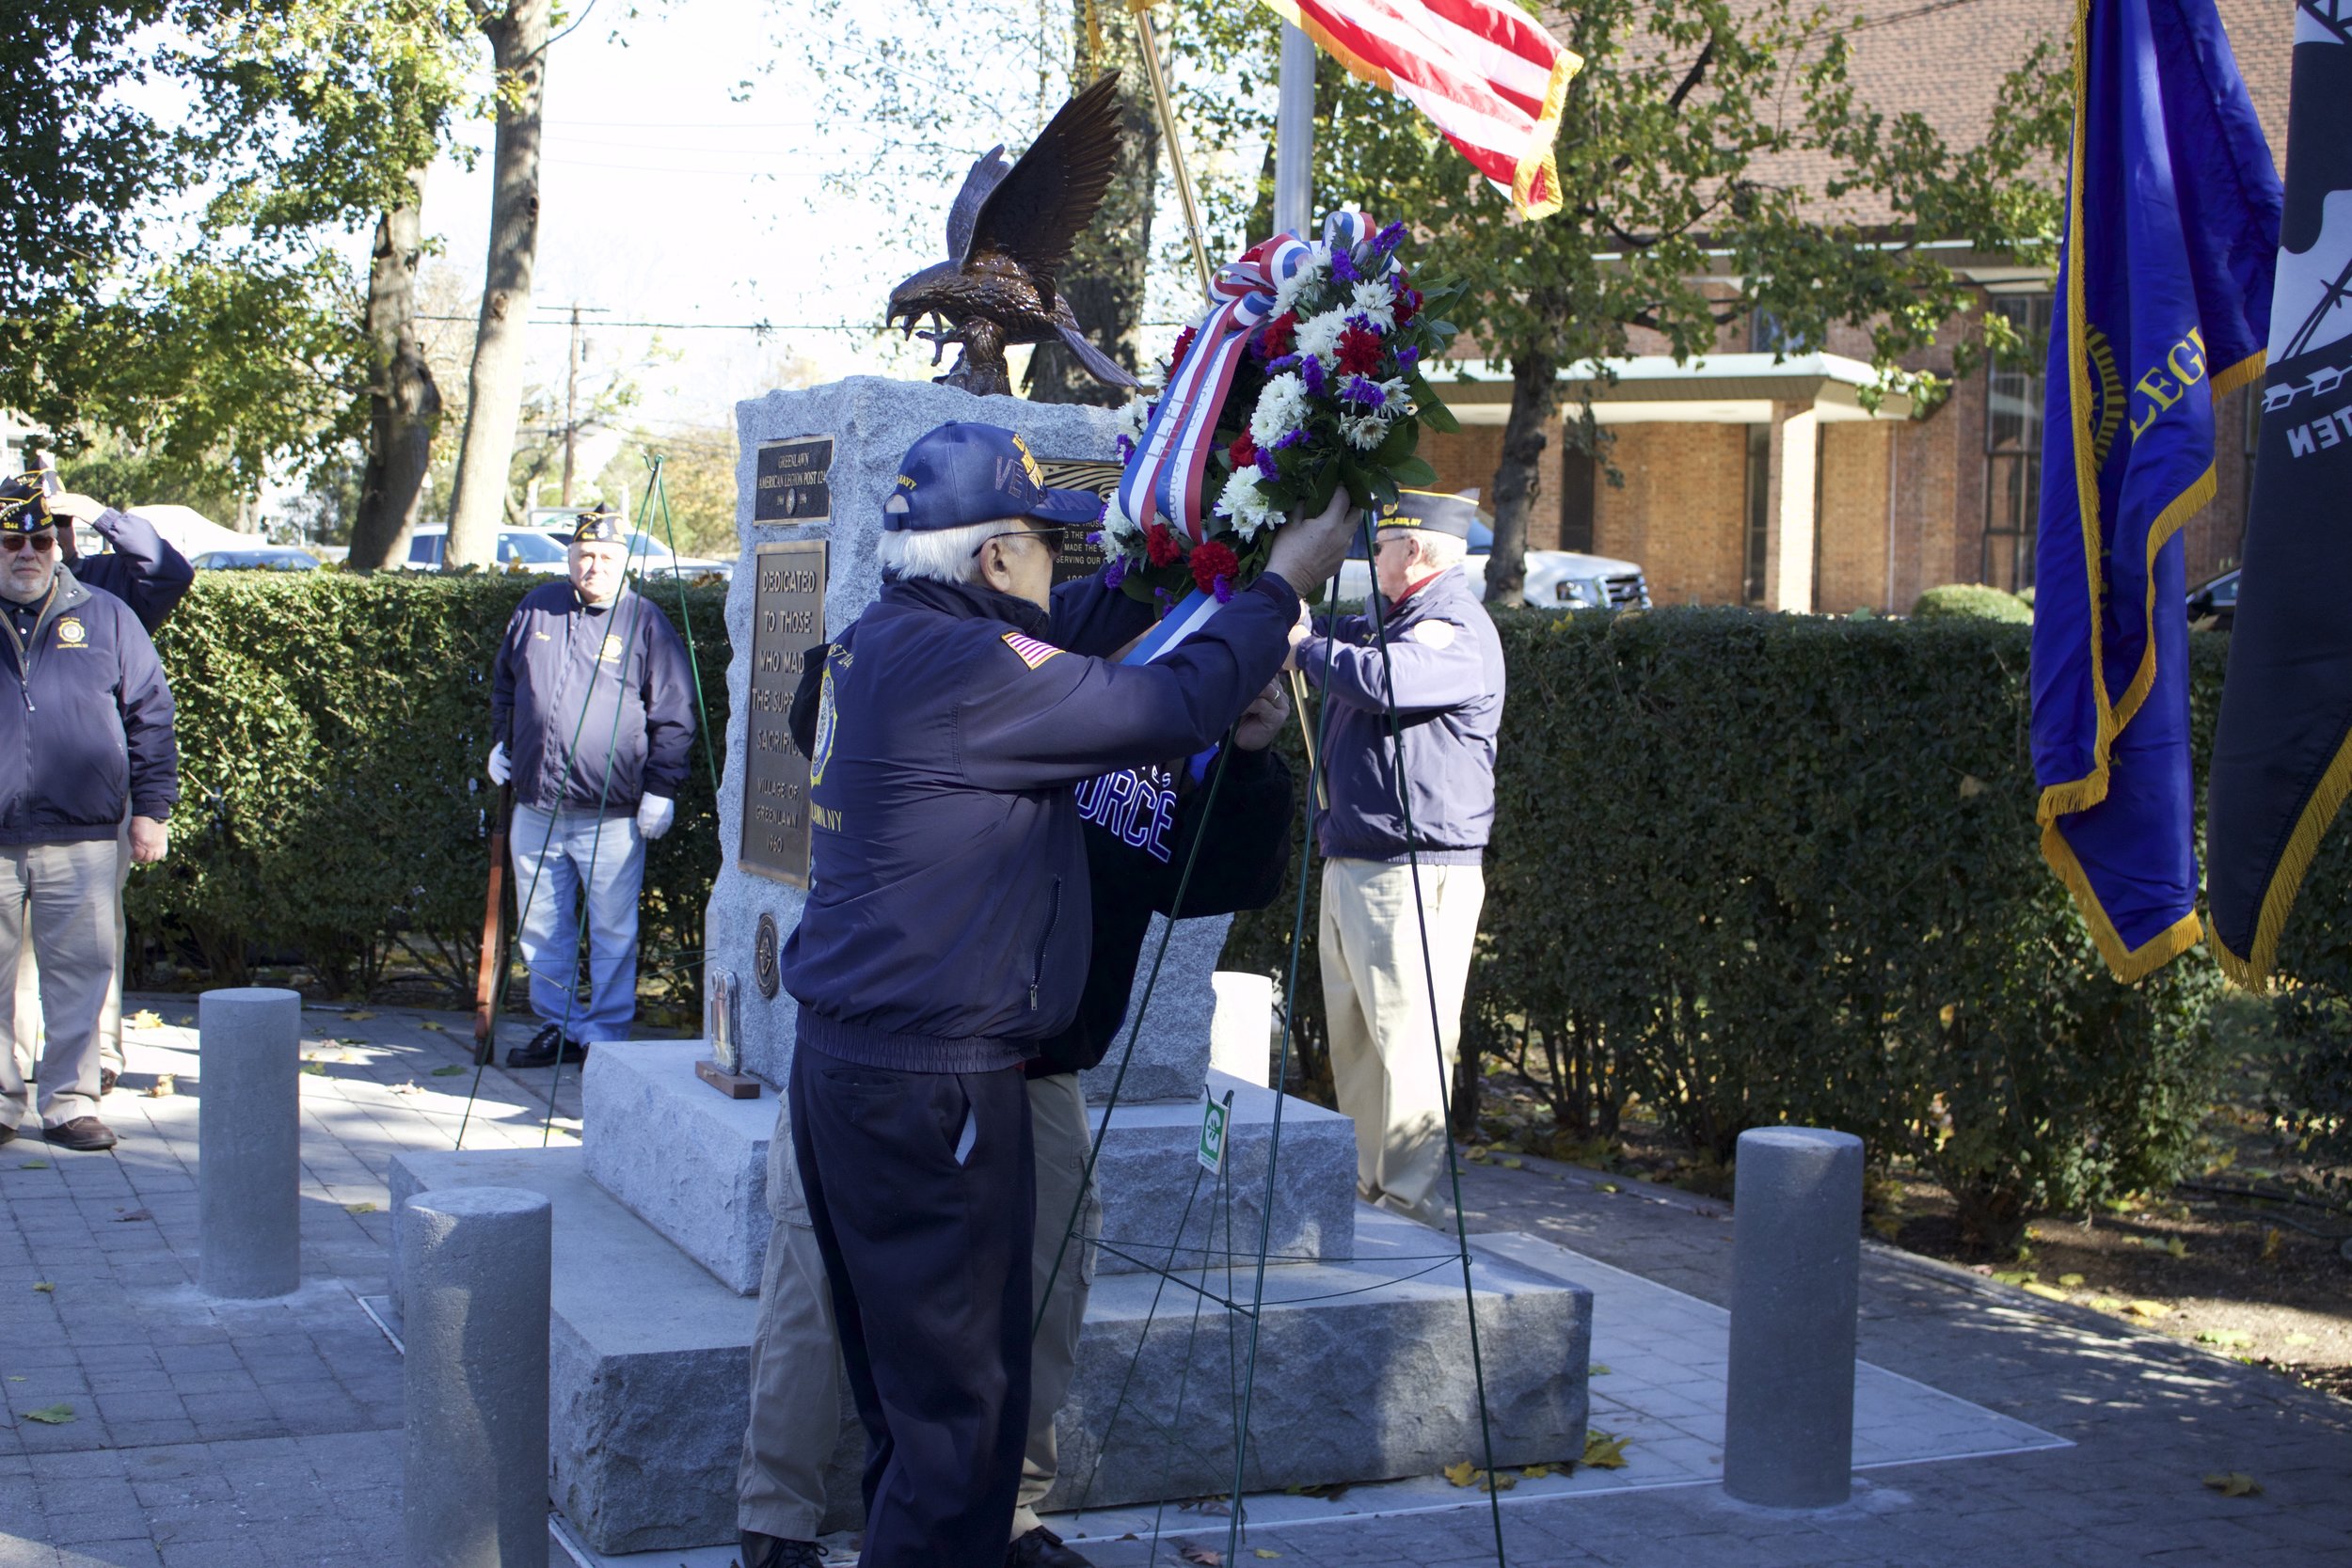   One American Legion Greenlawn Post 1244 member places a wreath at the monument during Saturday’s ceremony .  Long Islander News Photo/Janee Law  